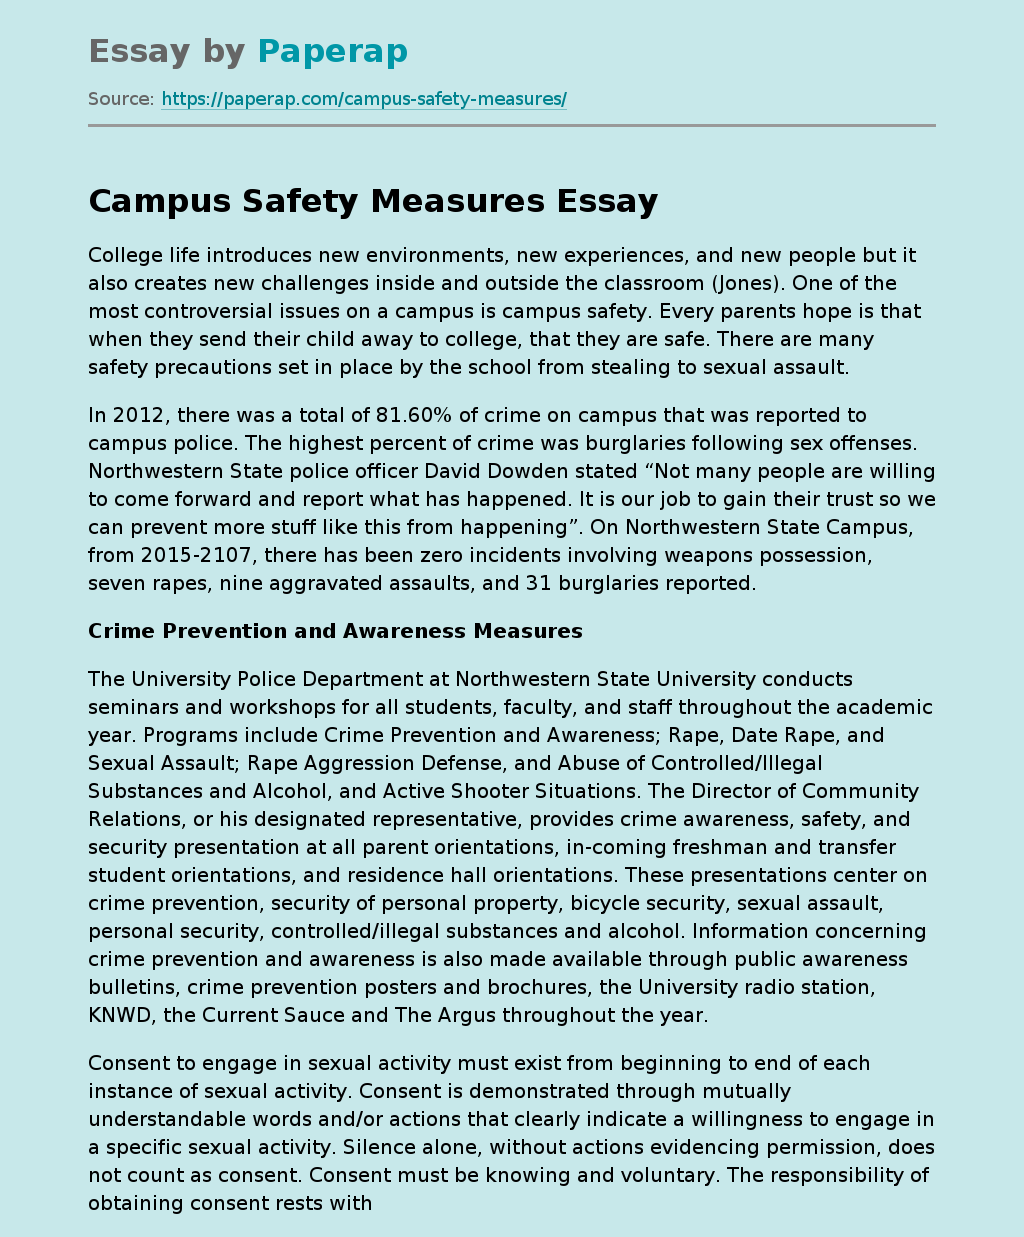 Campus Safety Measures